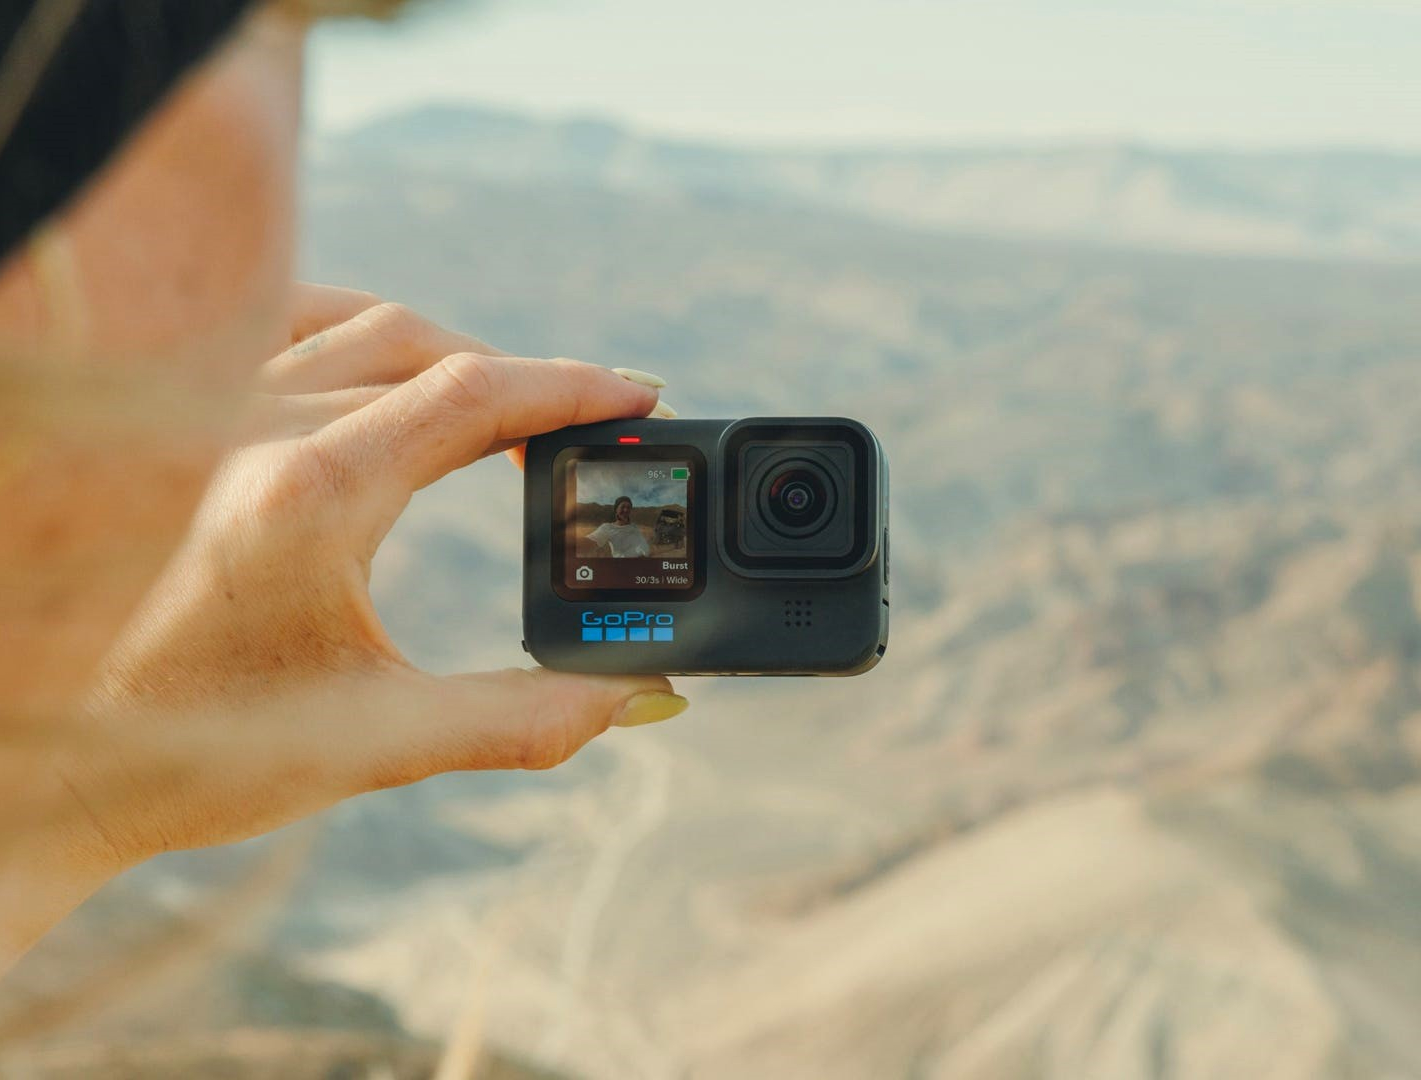 GoPro Hero 12 Black: Early evidence of new action camera emerges